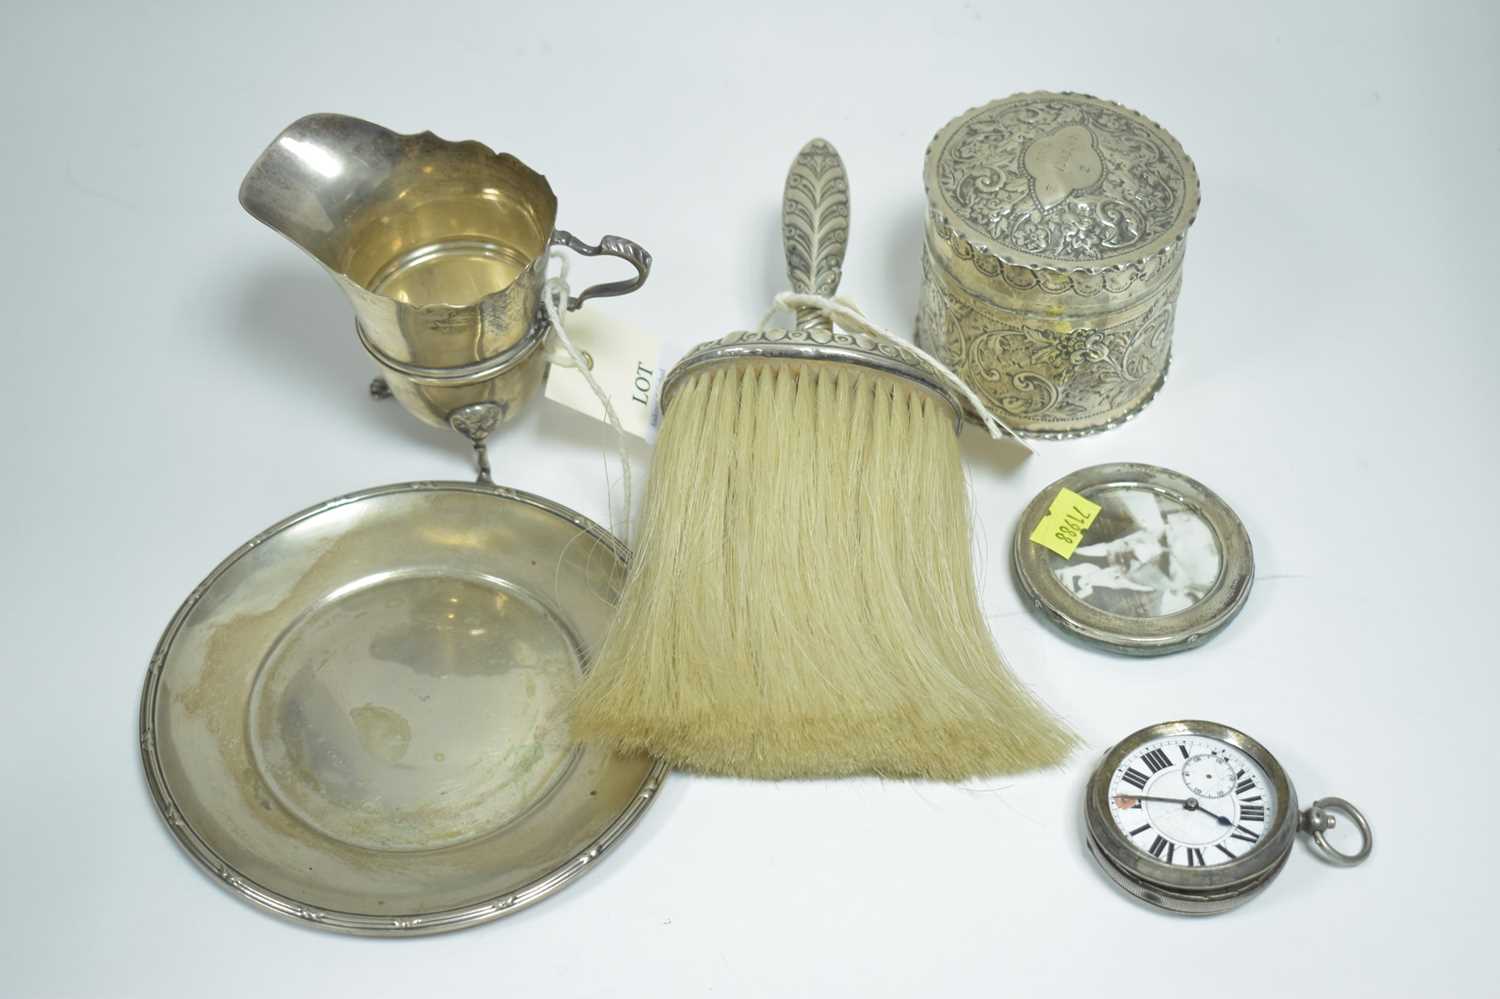 Lot 1 - Silver items